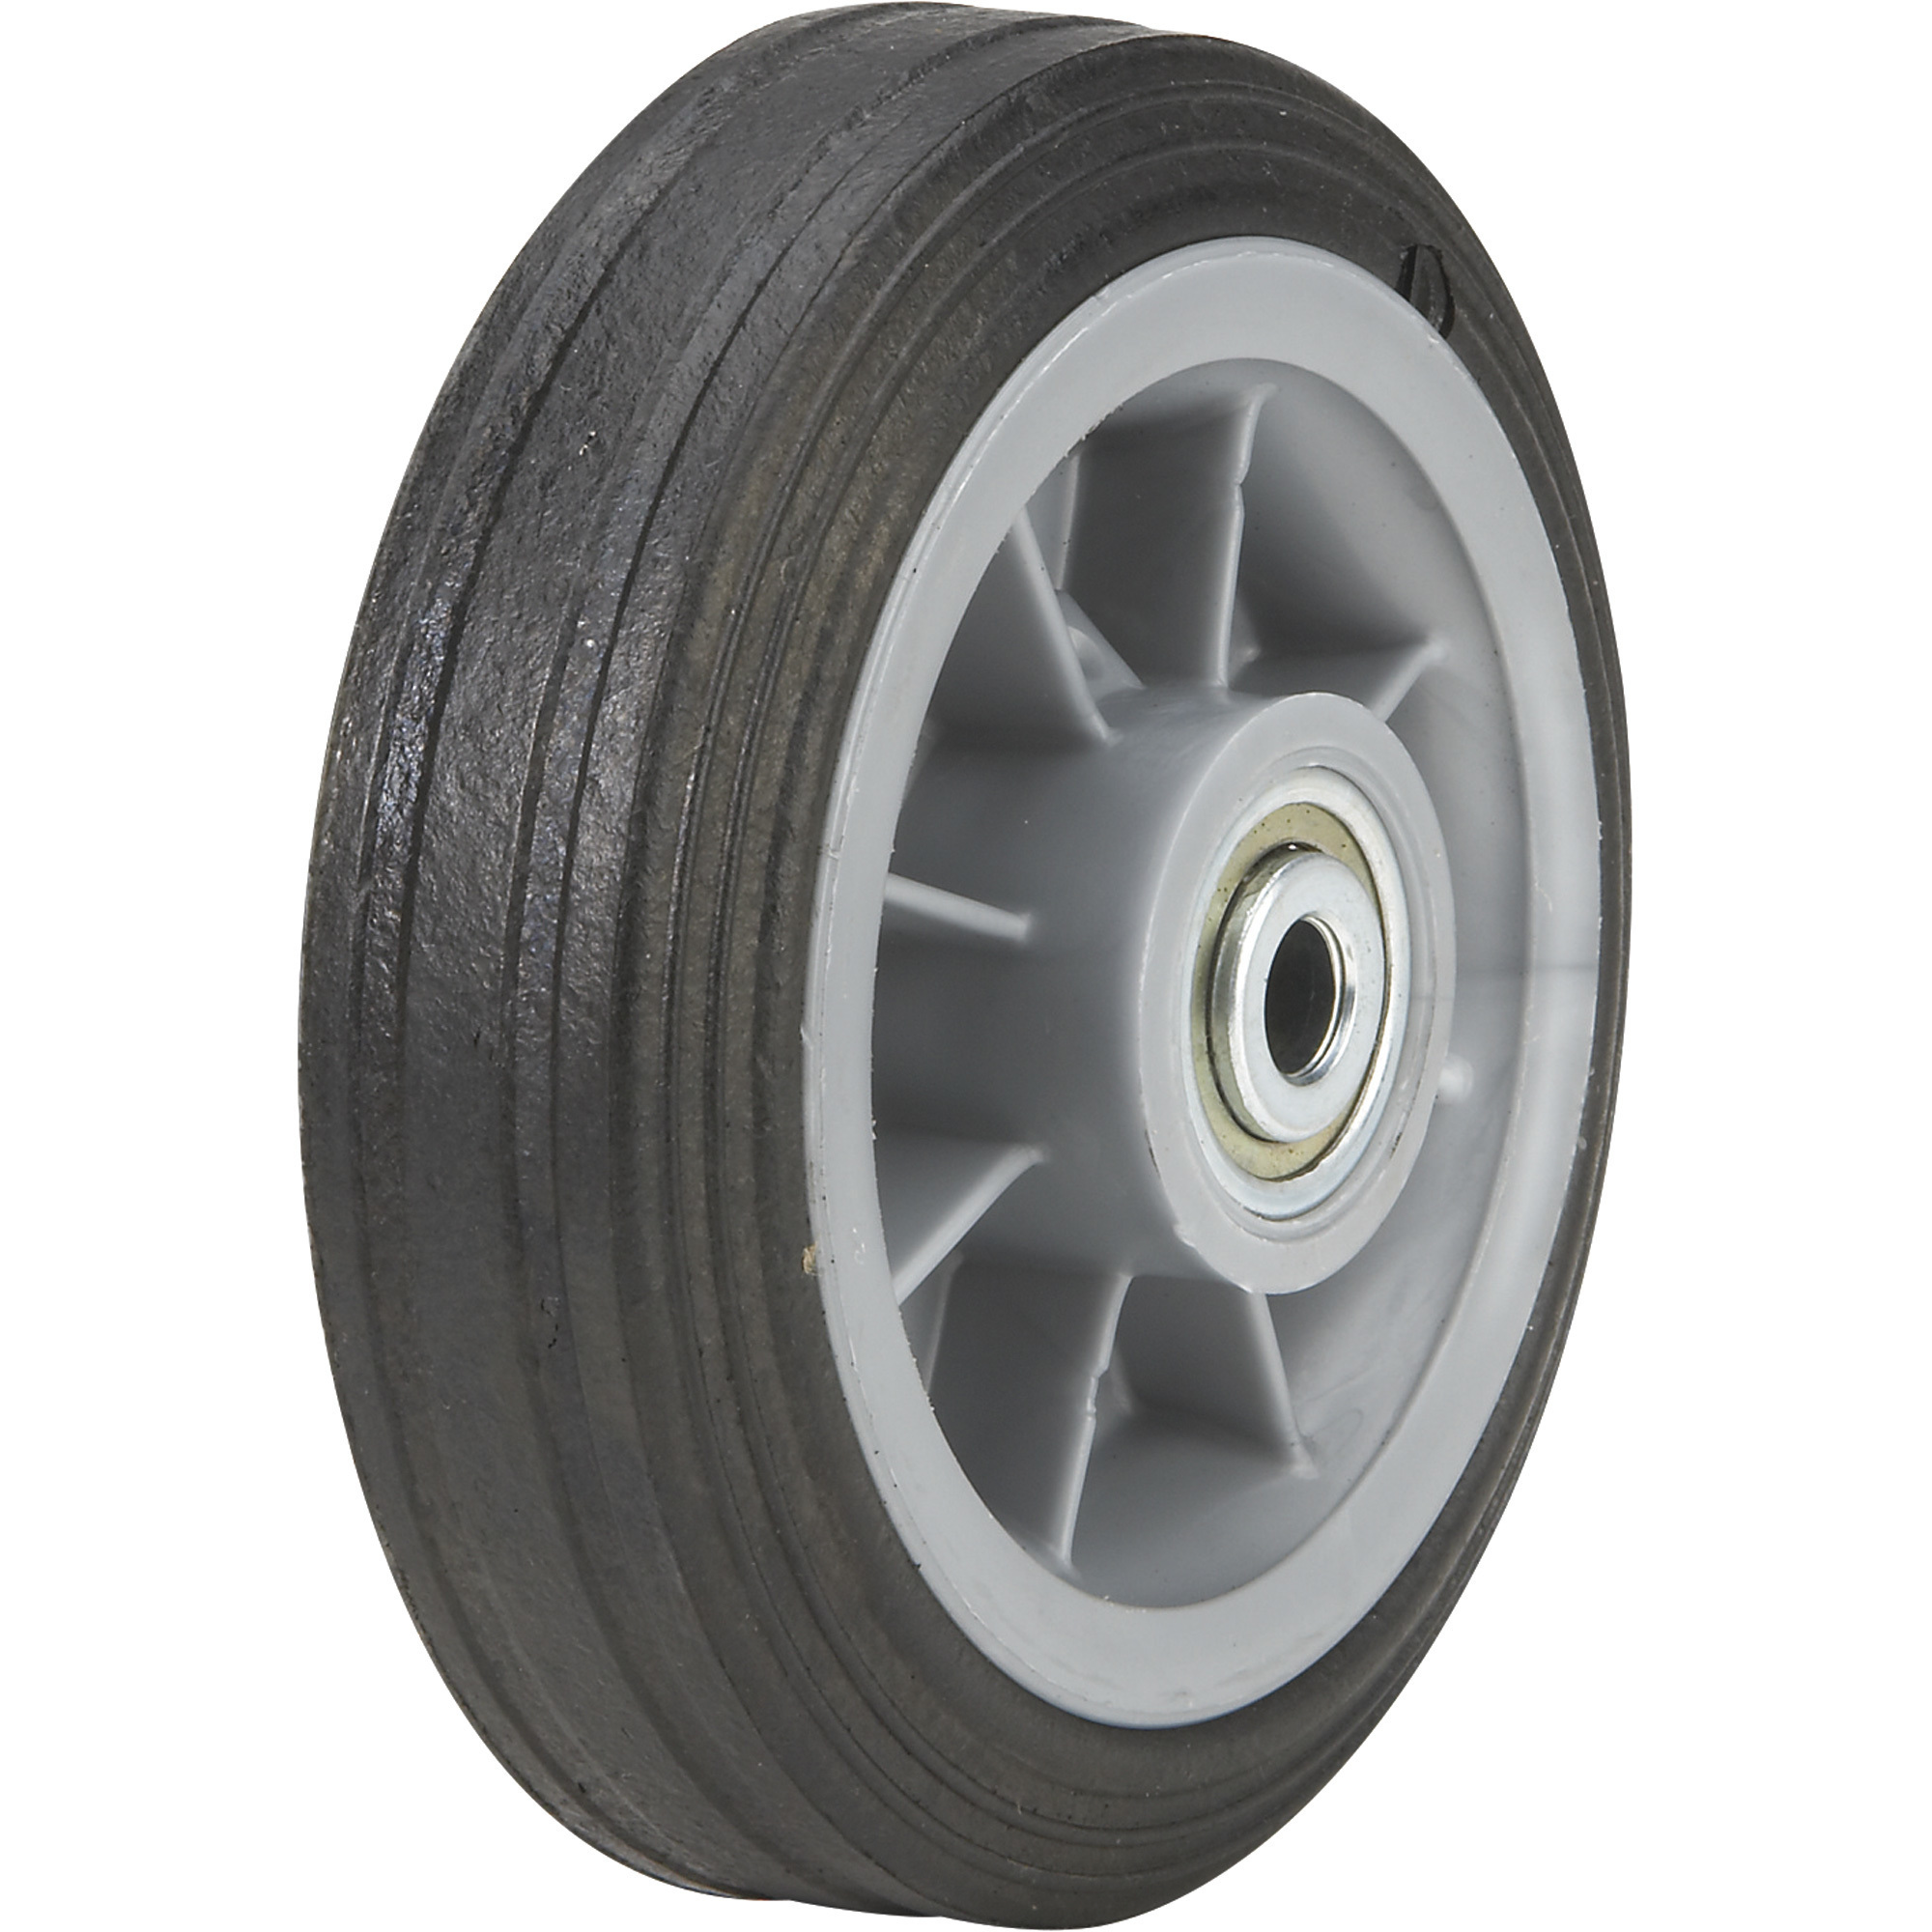 Martin Flat-Free Solid Rubber Tire and Poly Wheel â 6 x 1.50 Tire, Model ZP61RT-325